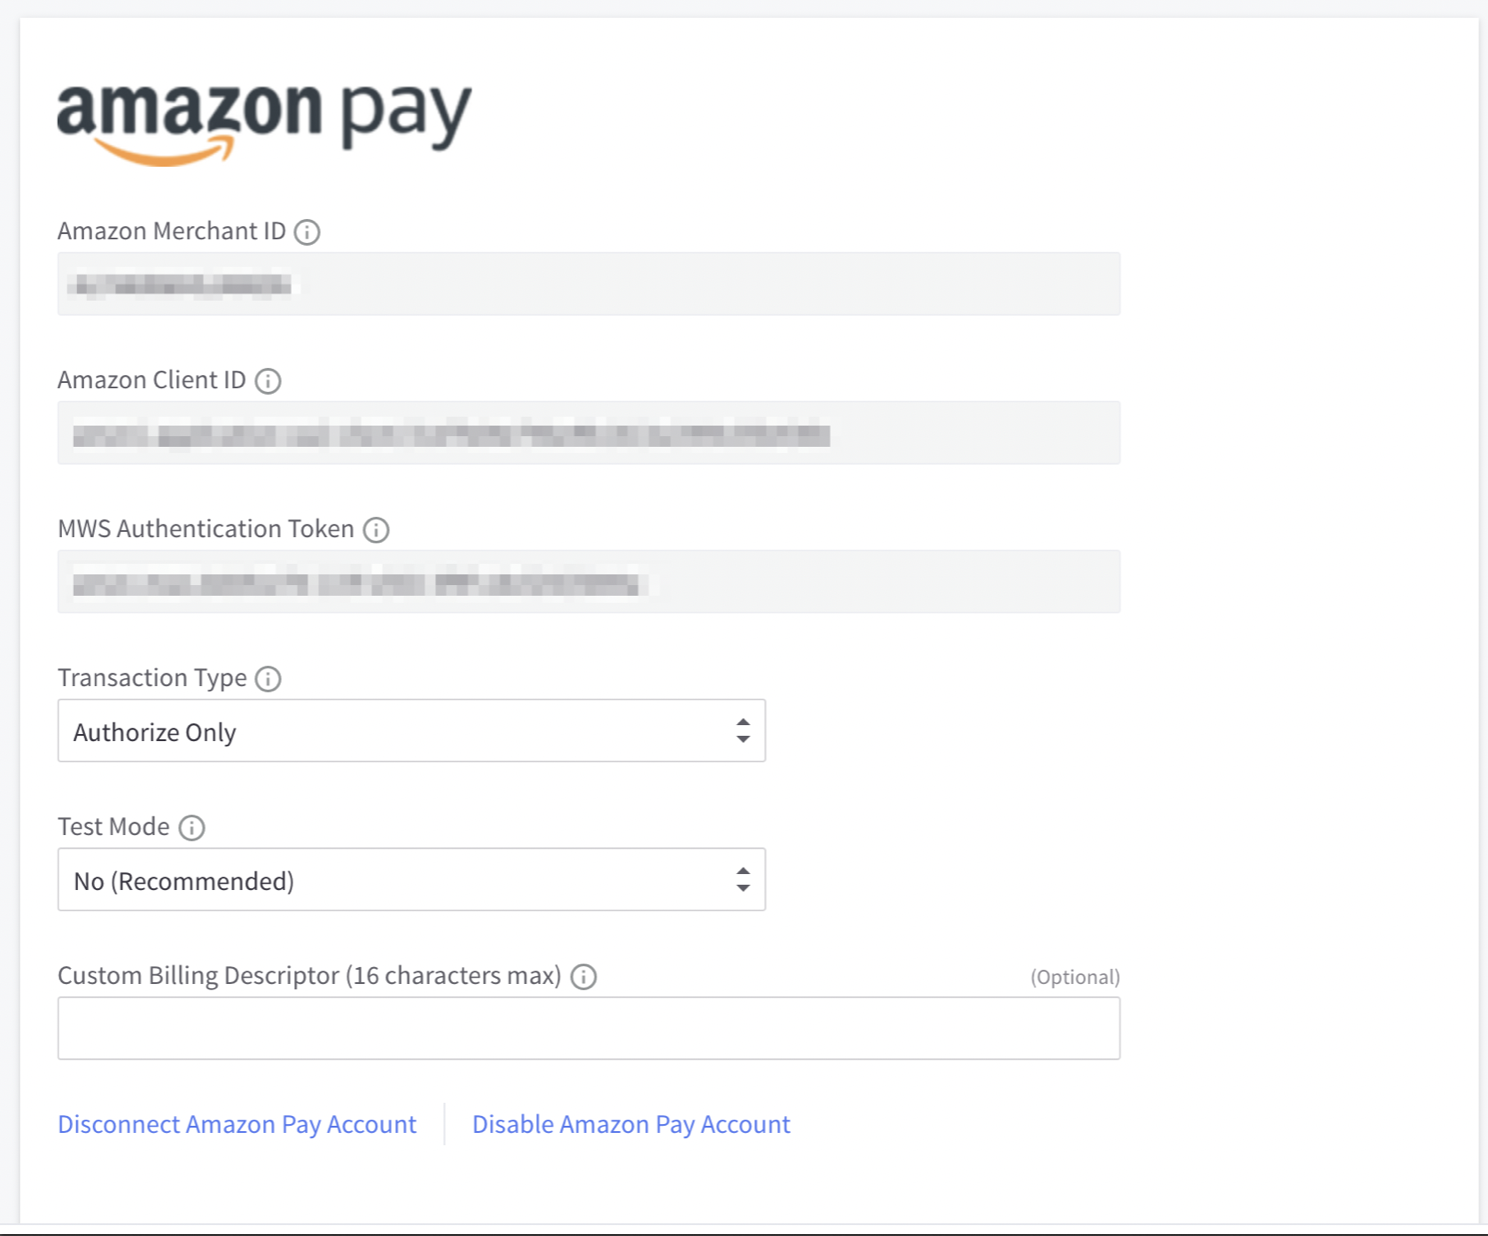 The Amazon Pay settings page in BigCommerce